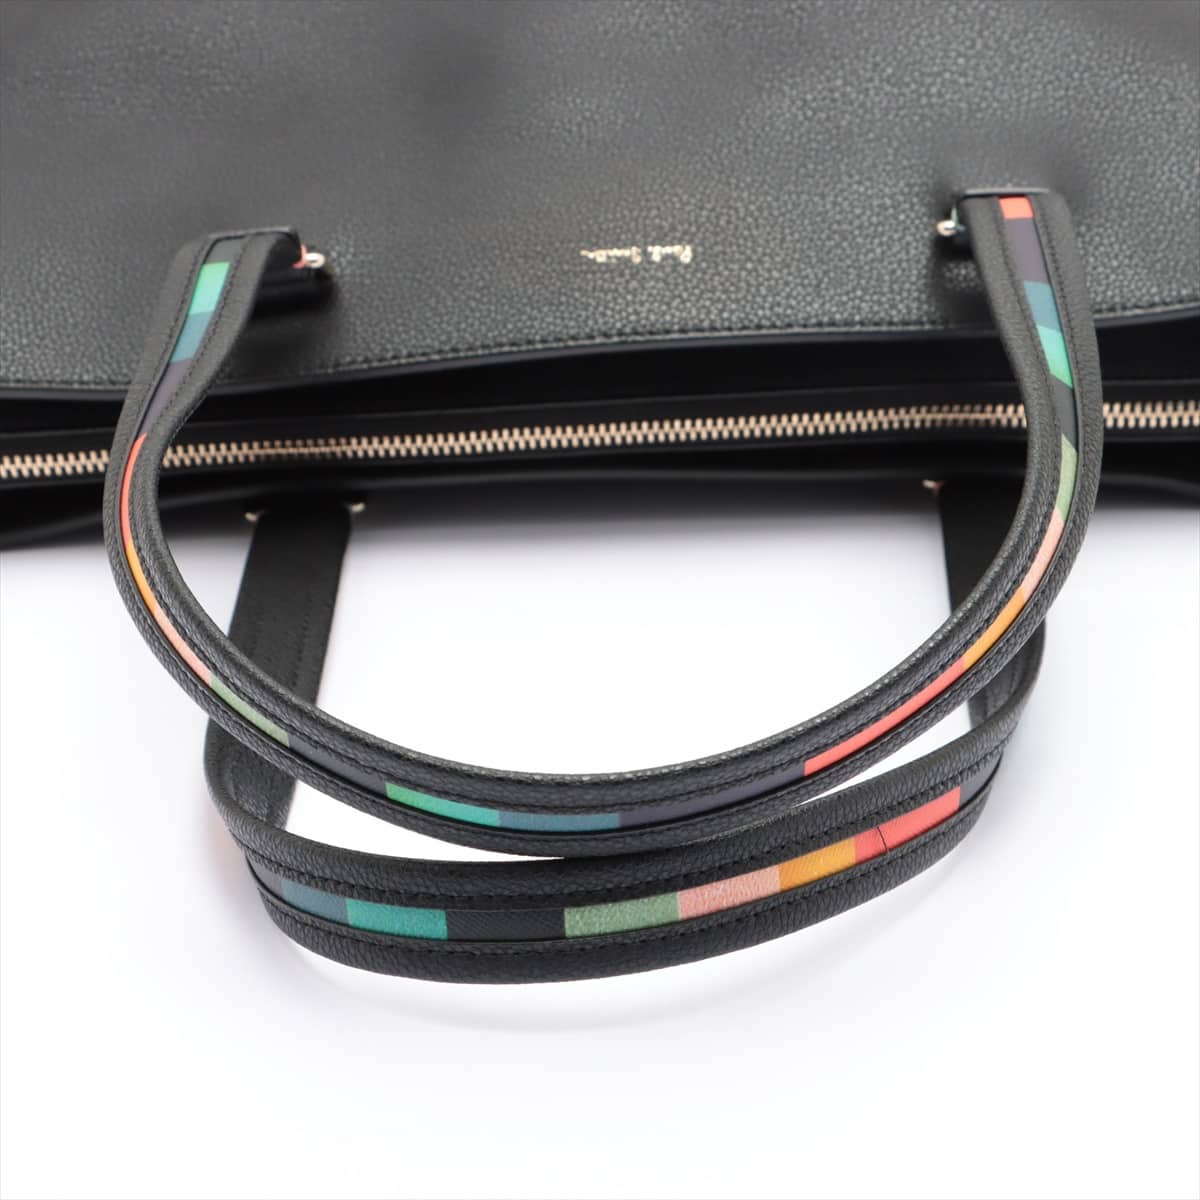 Paul Smith Leather Tote bag Black